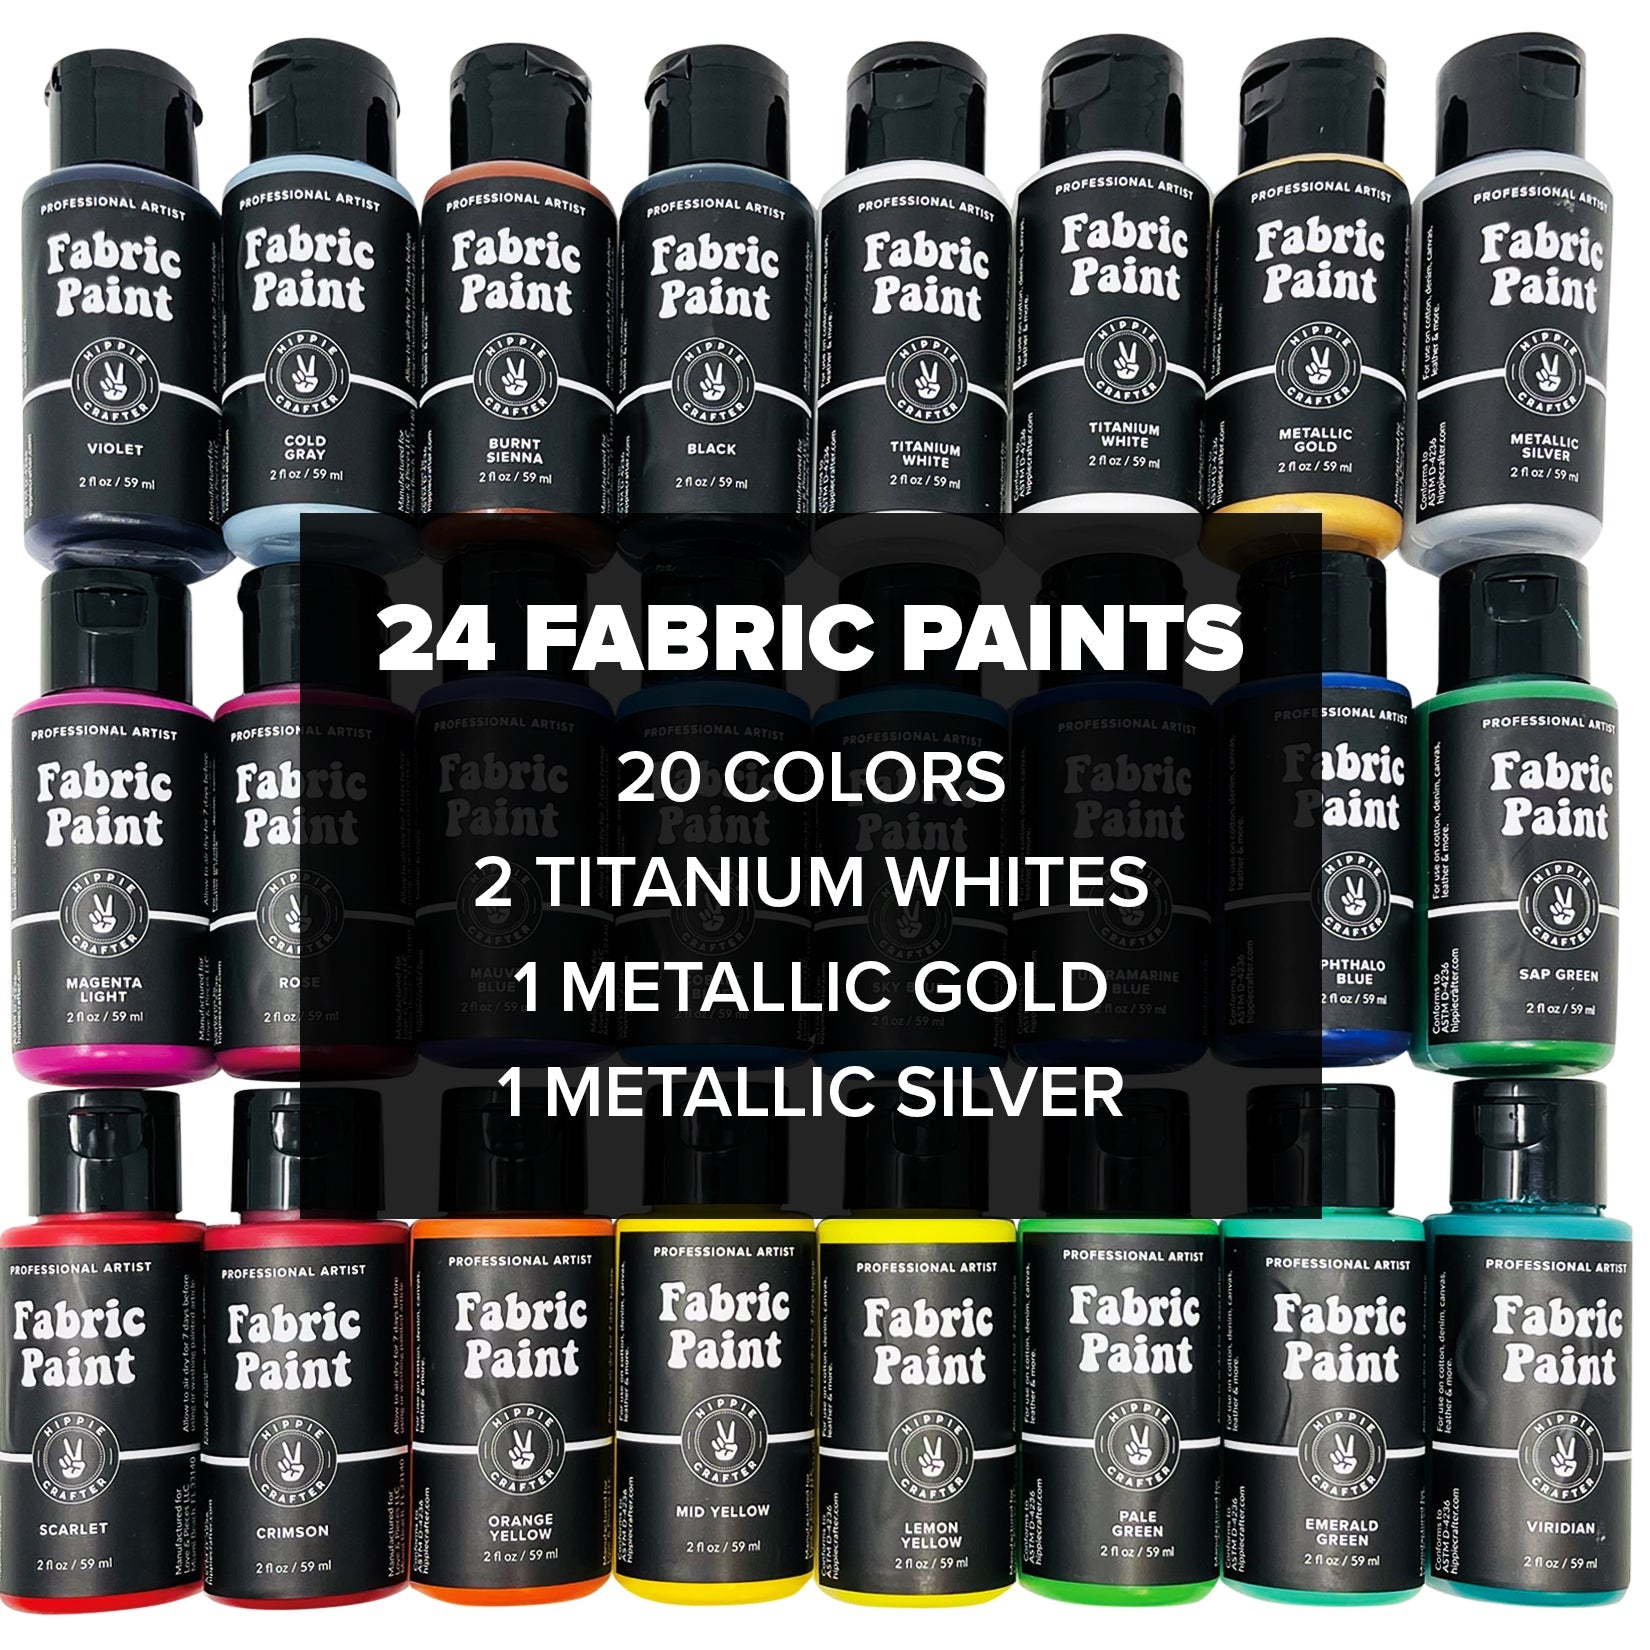 Colorful Fabric Paint Set for Clothes with 6 Brushes, 1 Palette, 12 Colors  - Permanent Textile Paint Puffy Paint Kit for Shoes, Canvas - Non-Toxic